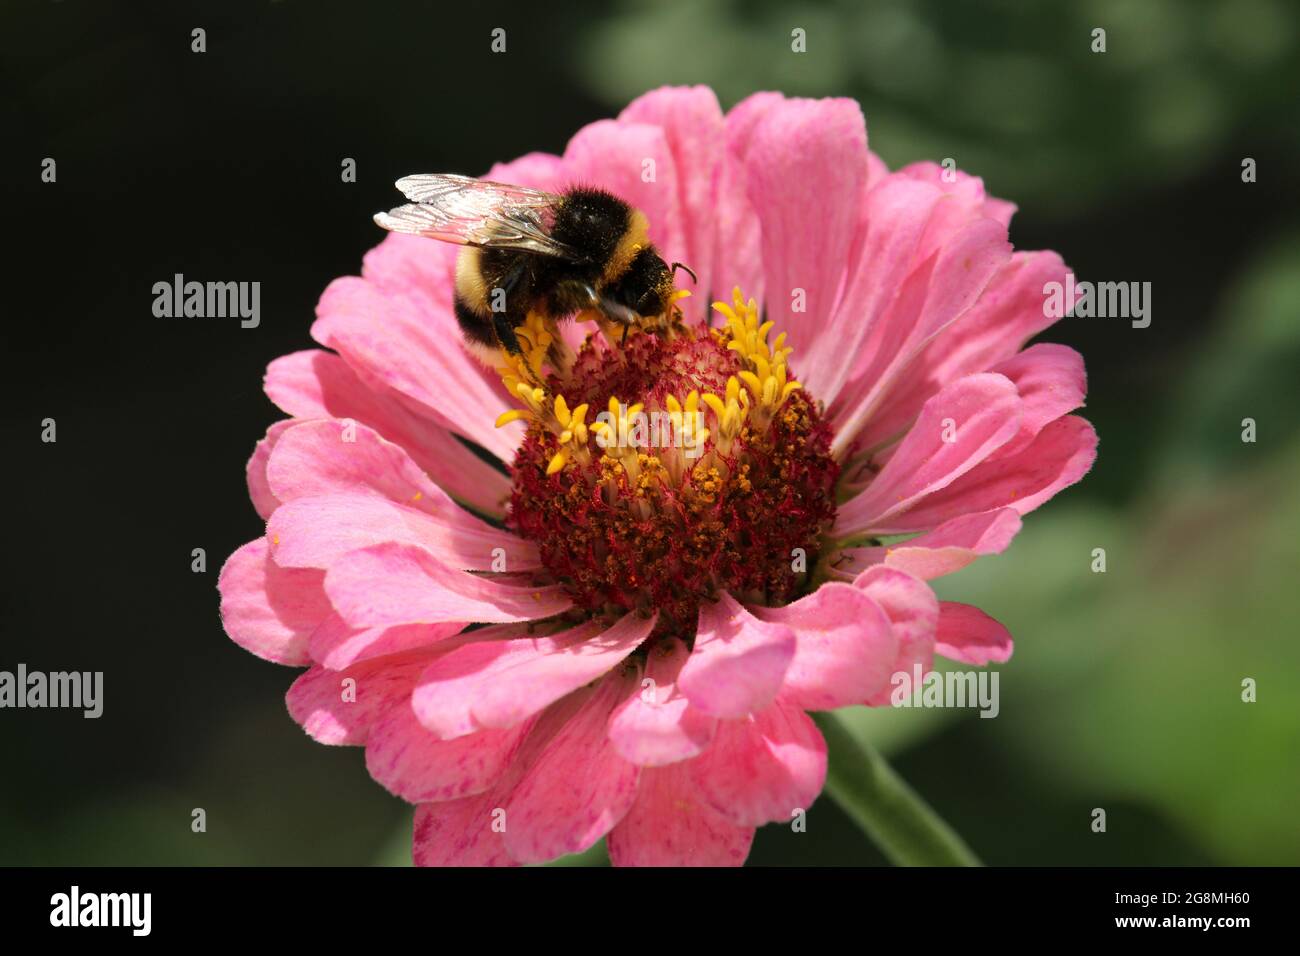 A bee sitting on a flower zinnia. Macro photo of nature plant flower zinnia on blurred background. Stock Photo